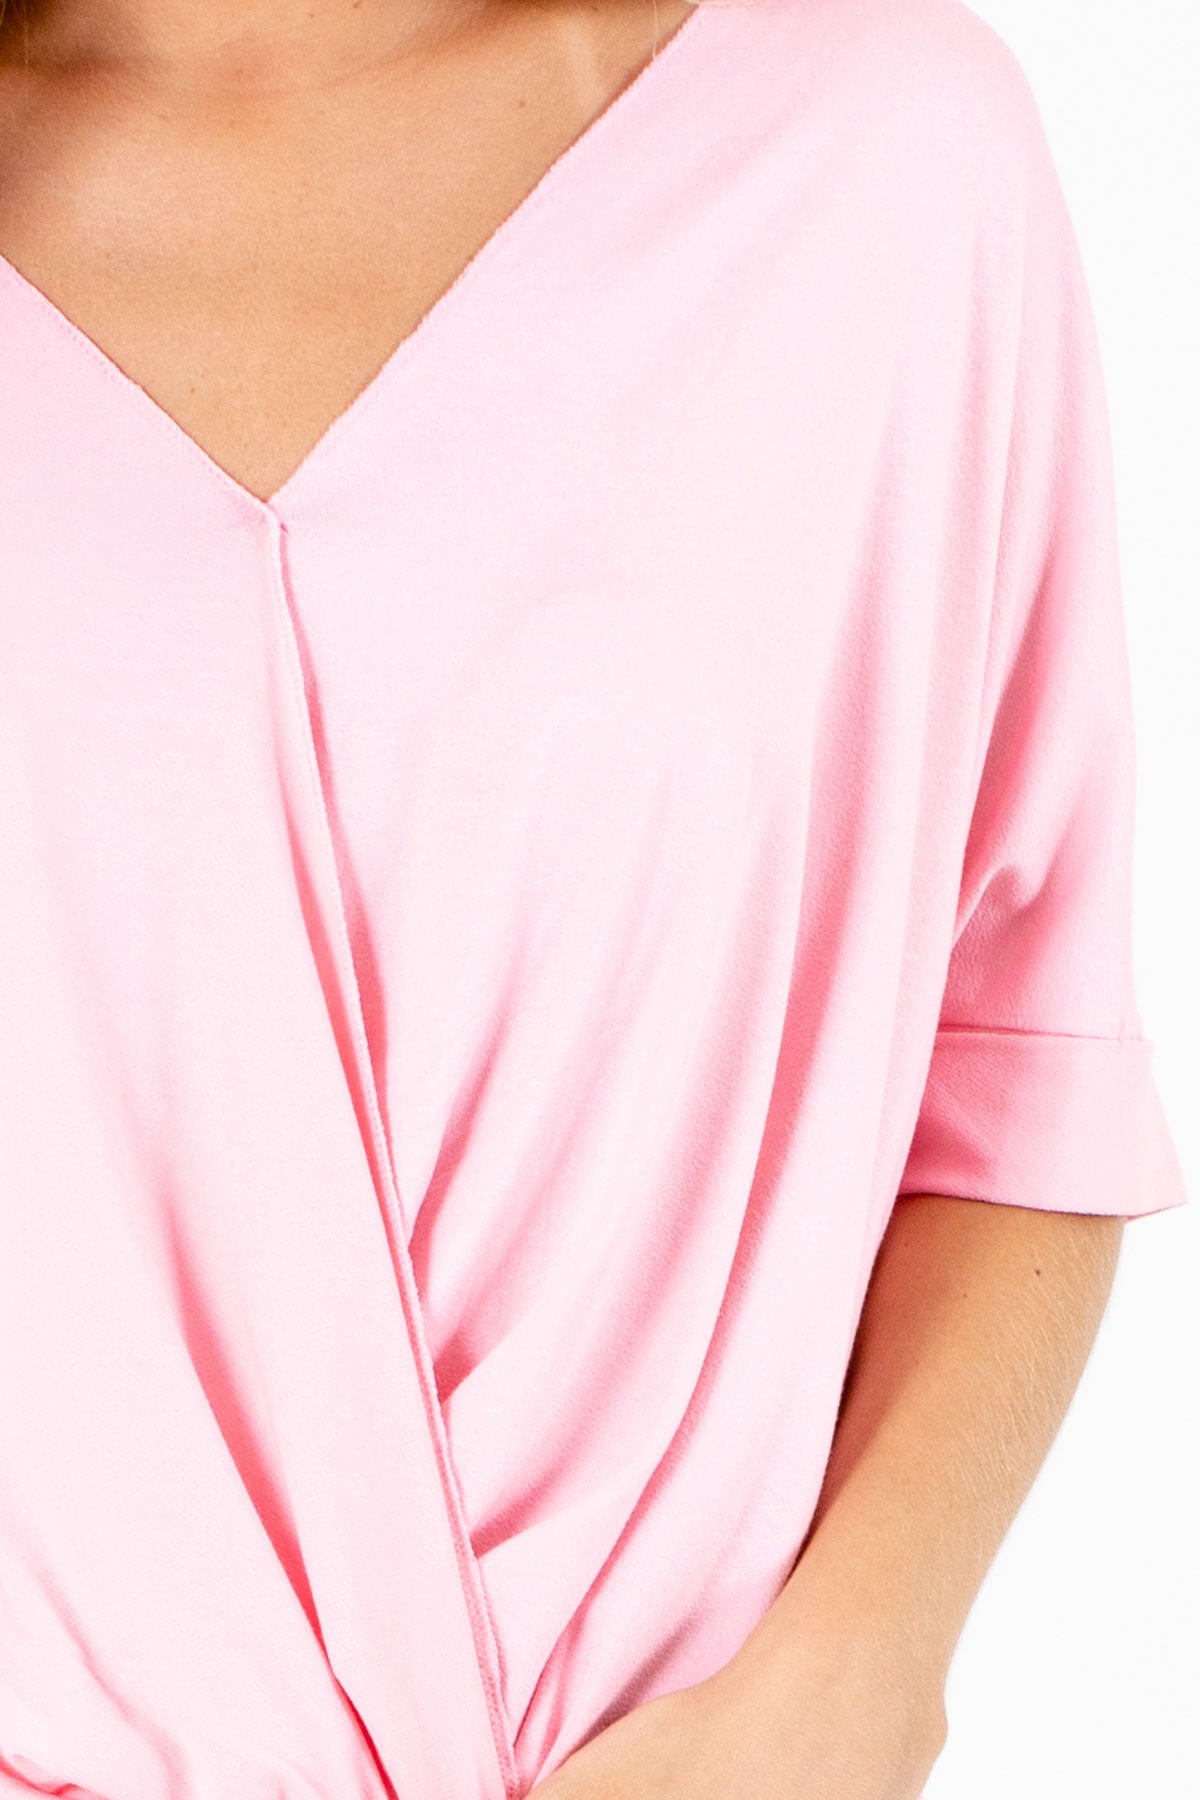 Women's Wrap Style Pink Blouse from Bella Ella Boutique